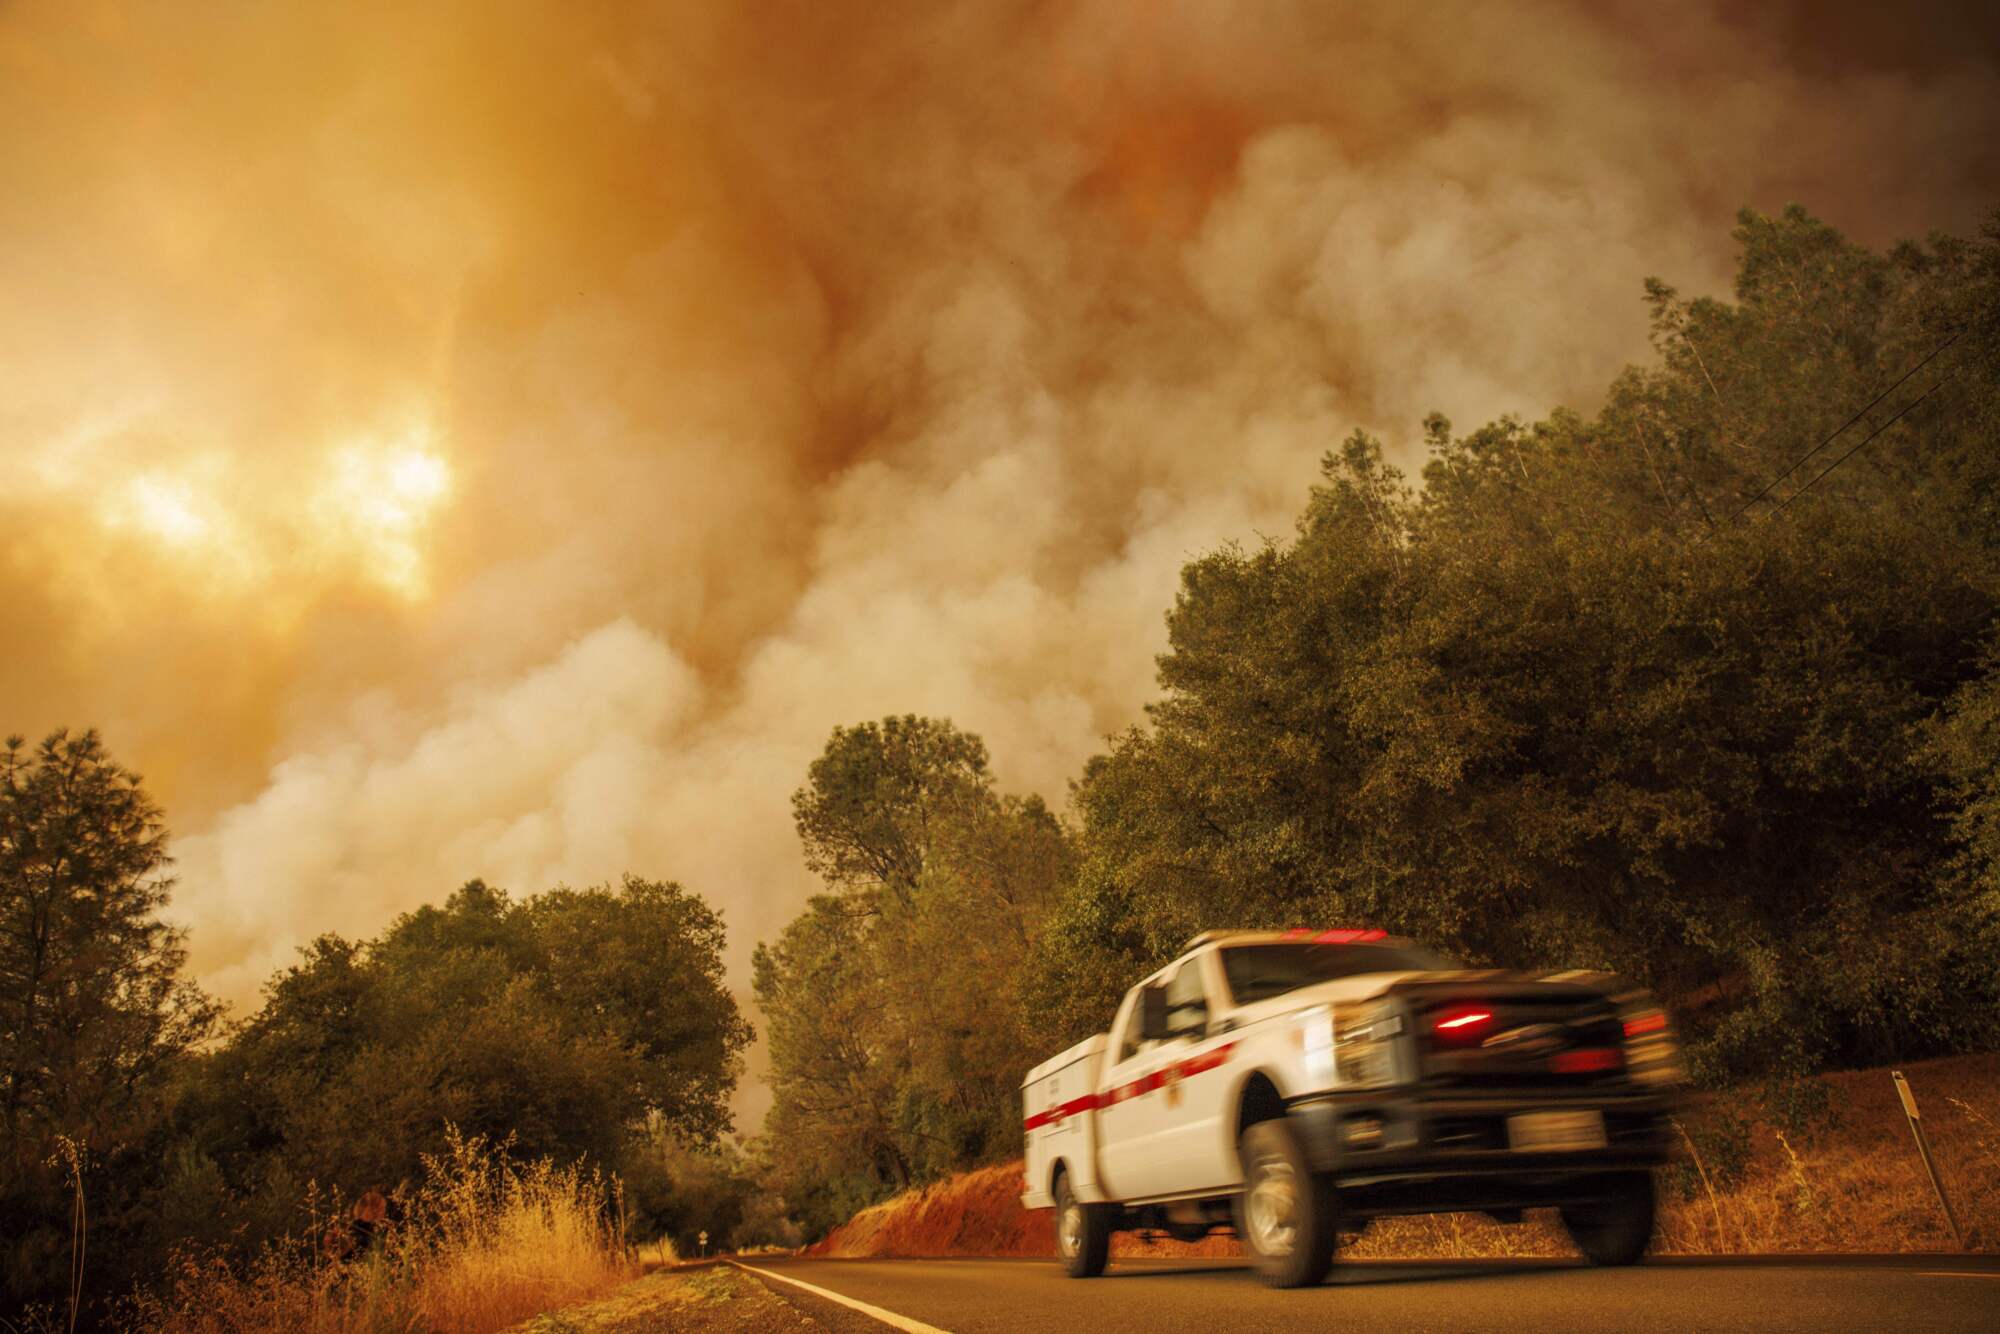 A fire truck drives by as the Thompson Fire burns in Oroville.